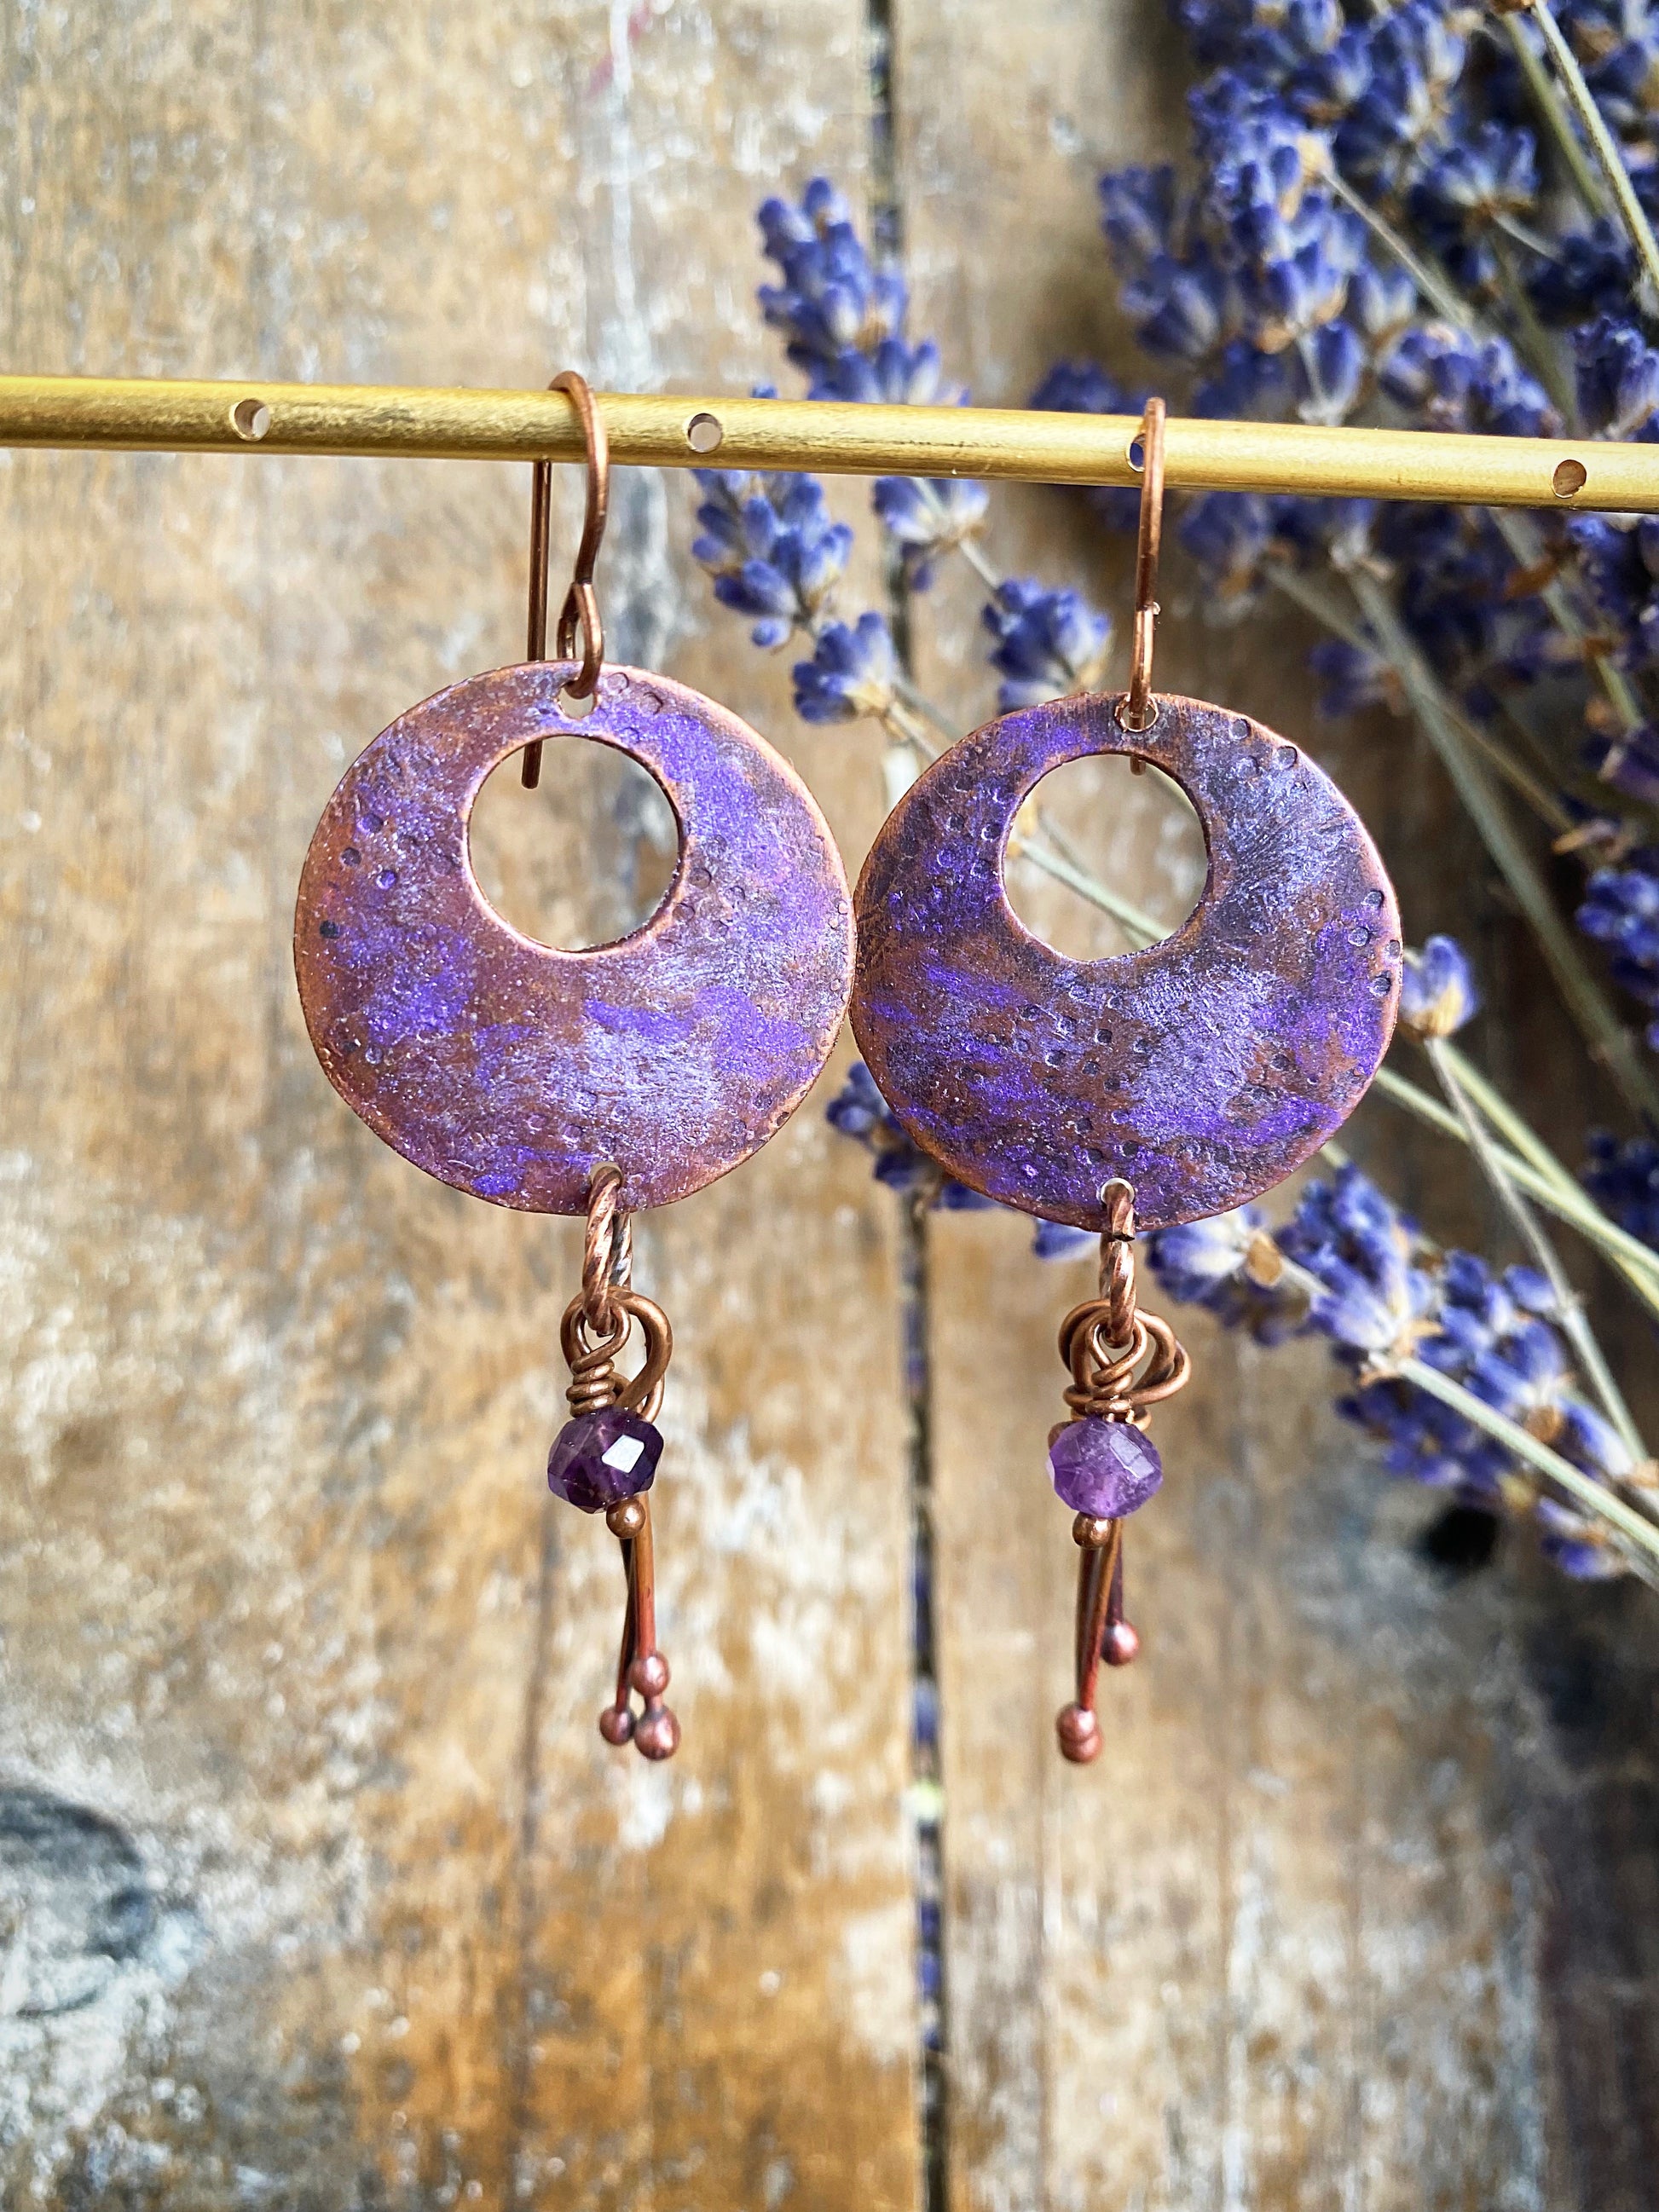 Copper purple patina charms Amethyst stone, earrings - Andria Bieber Designs 